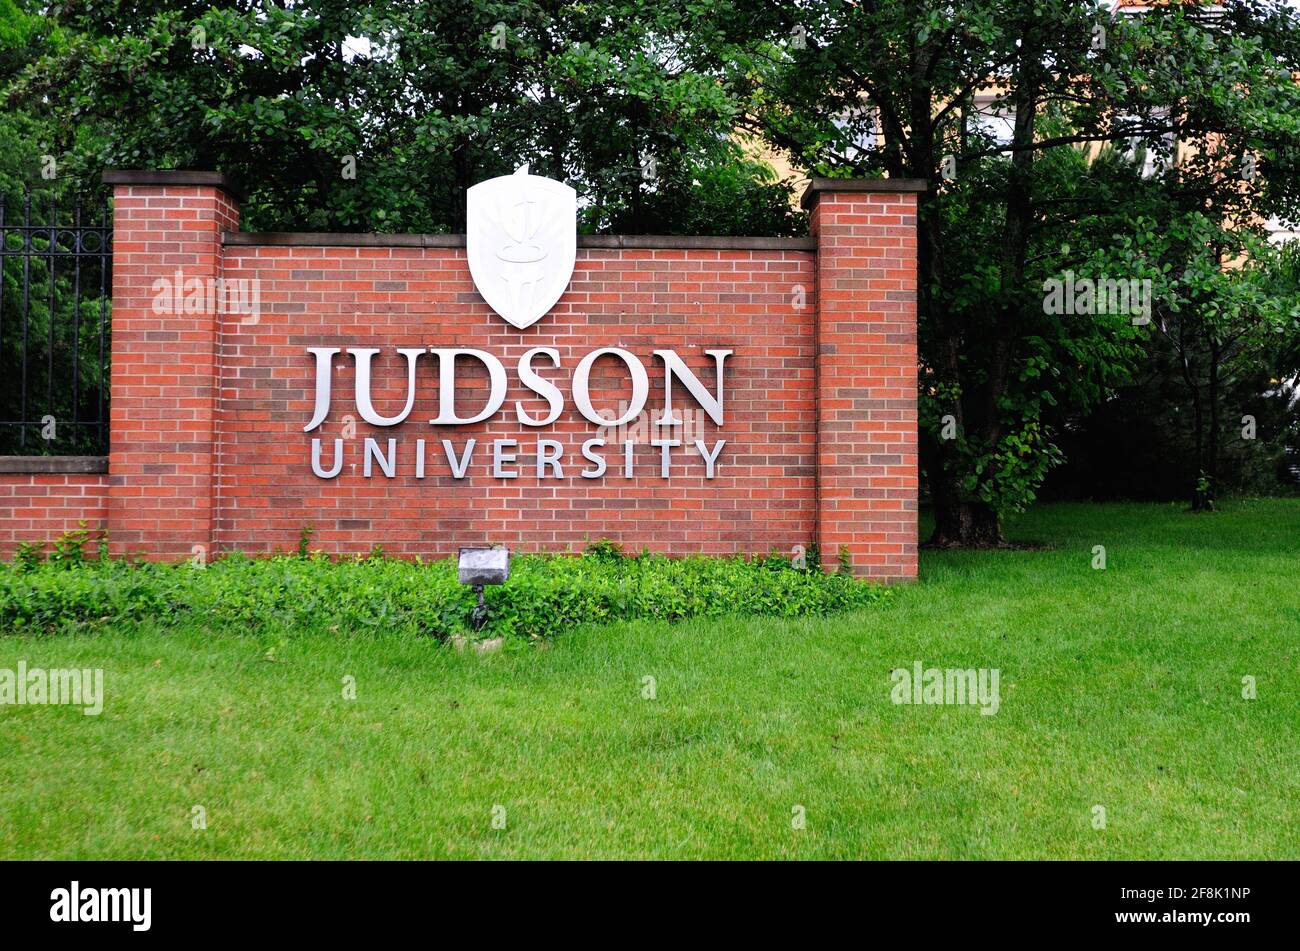 Judson University is an Christian liberal arts university located in Elgin, Illinois, USA. The school was founded in 1963. Stock Photo